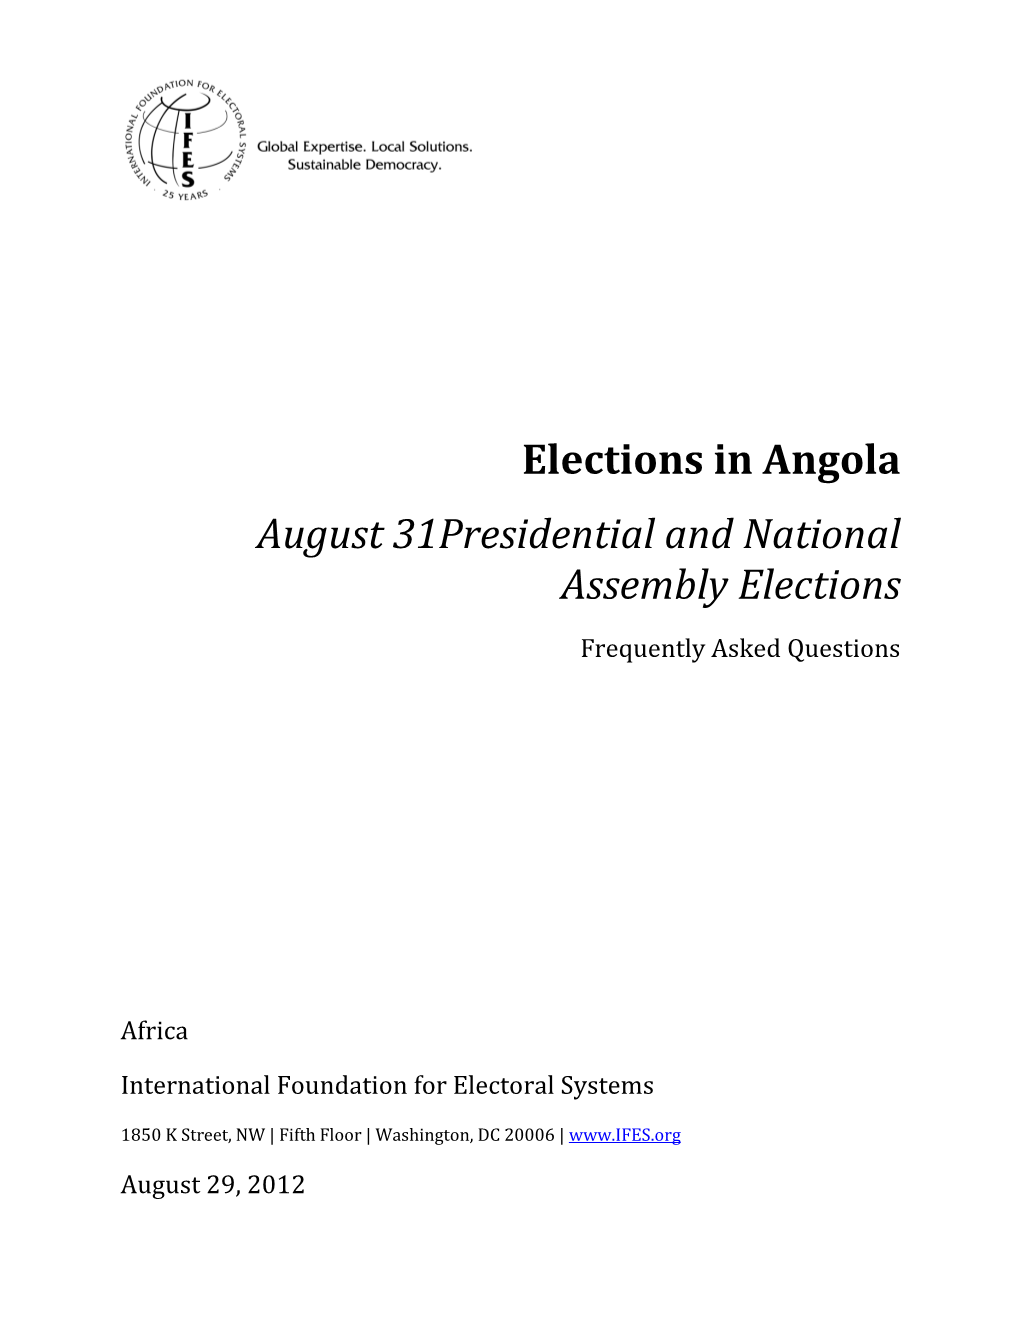 Elections in Angola August 31Presidential and National Assembly Elections